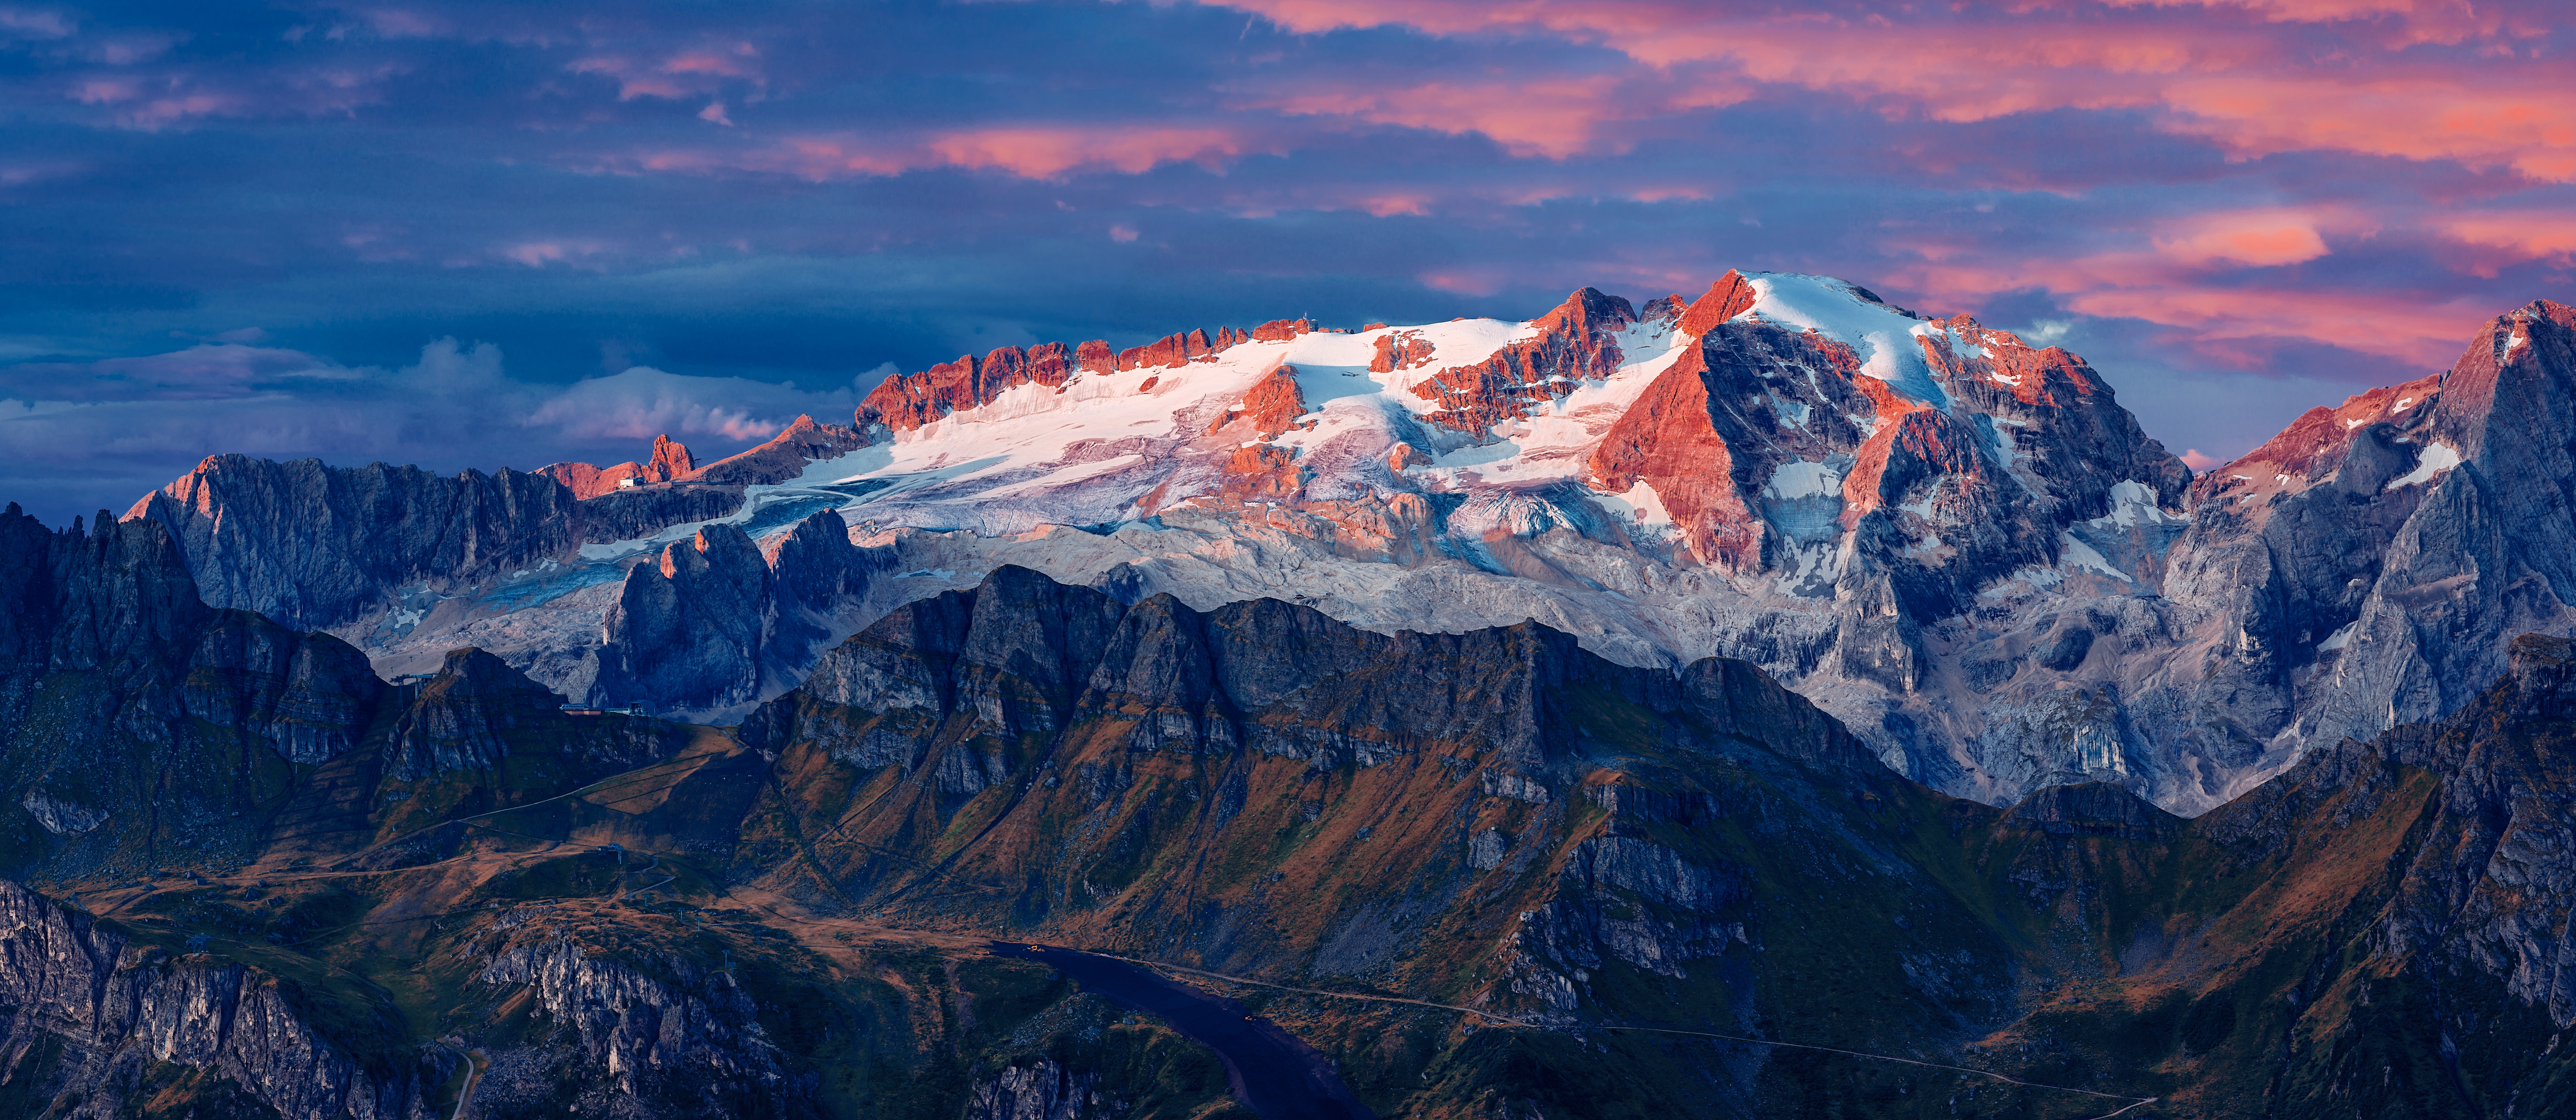 129114 download wallpaper mountains, nature, italy, vertex, top, glacier, marmolada screensavers and pictures for free